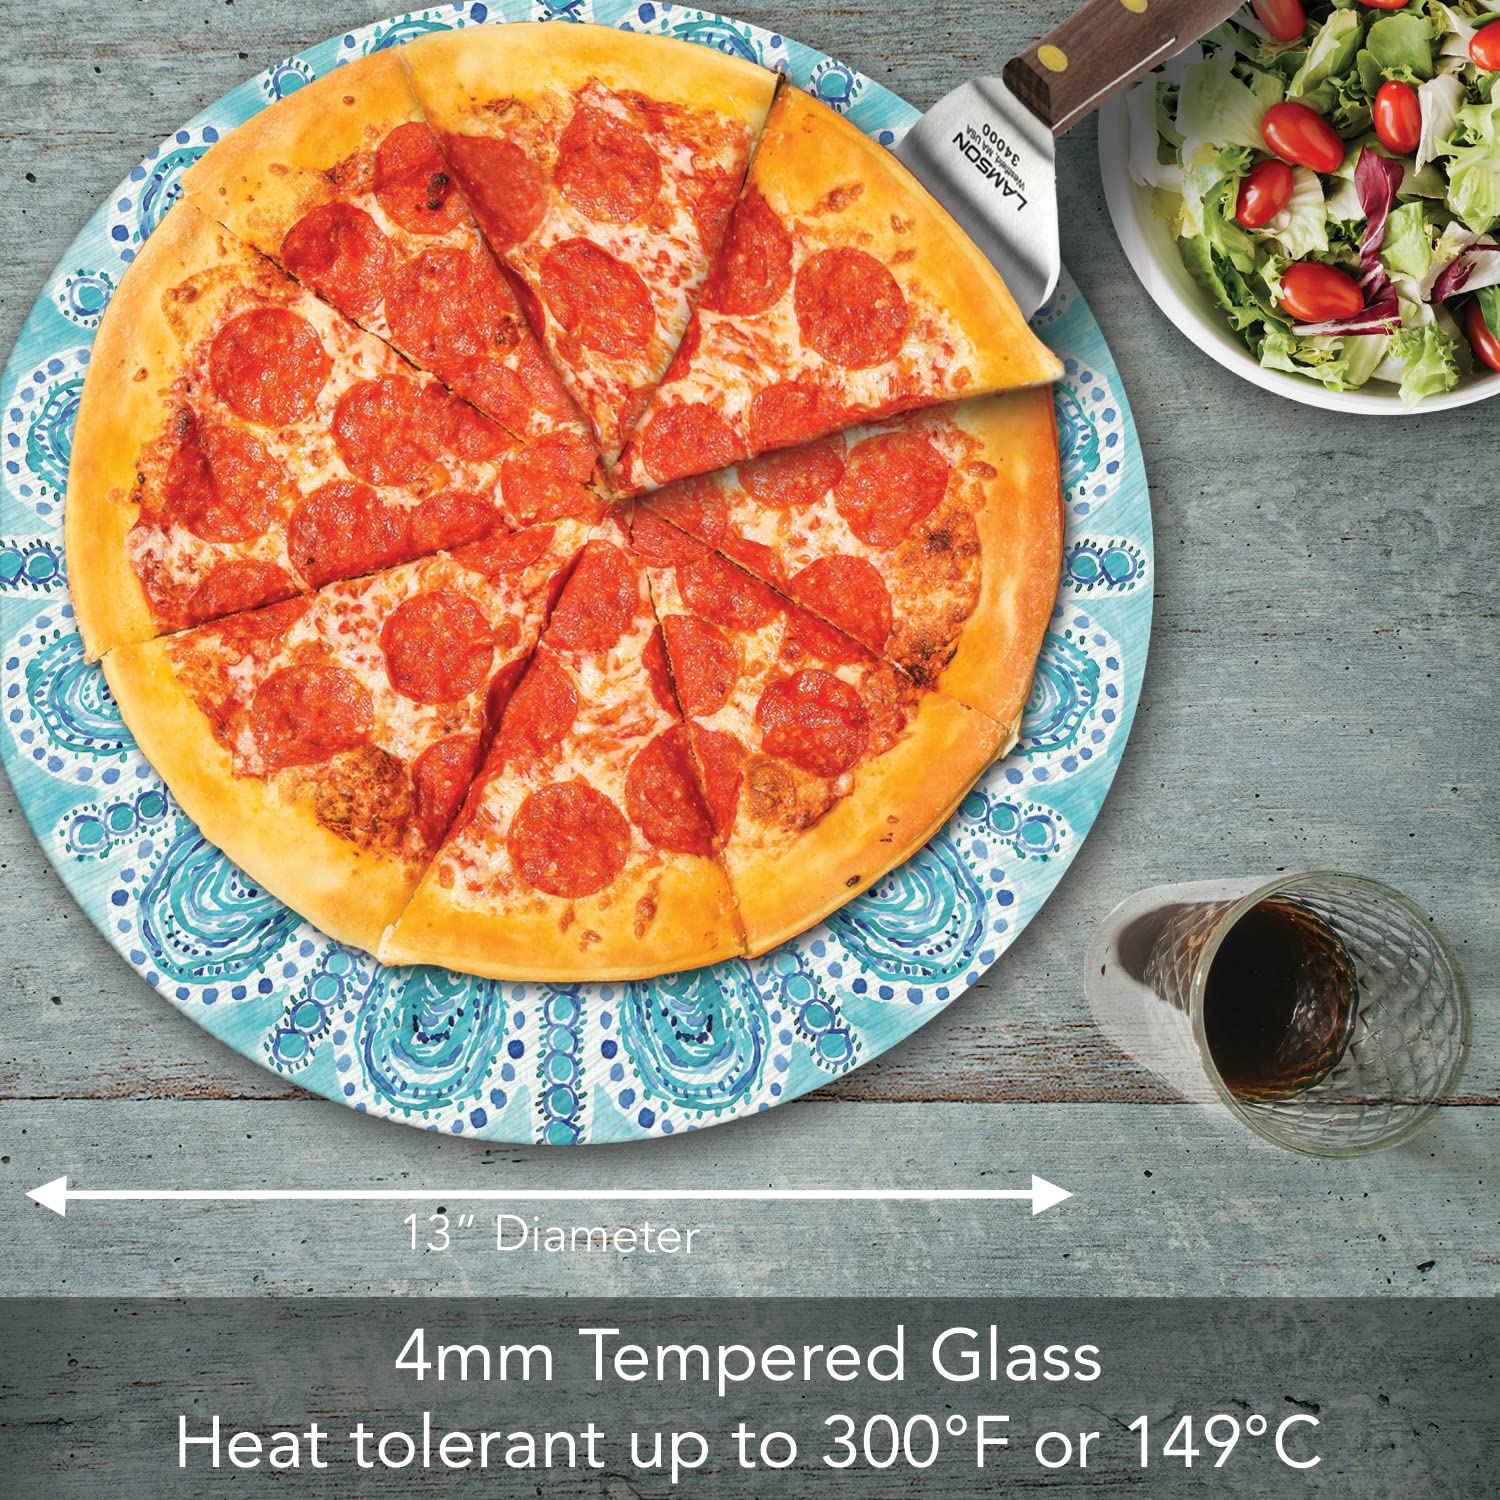 Ocean Fantasy 4mm Heat Tolerant Tempered Glass Lazy Susan Turntable 13" Round Cake Plate, Pizza Stand, Condiment Caddy